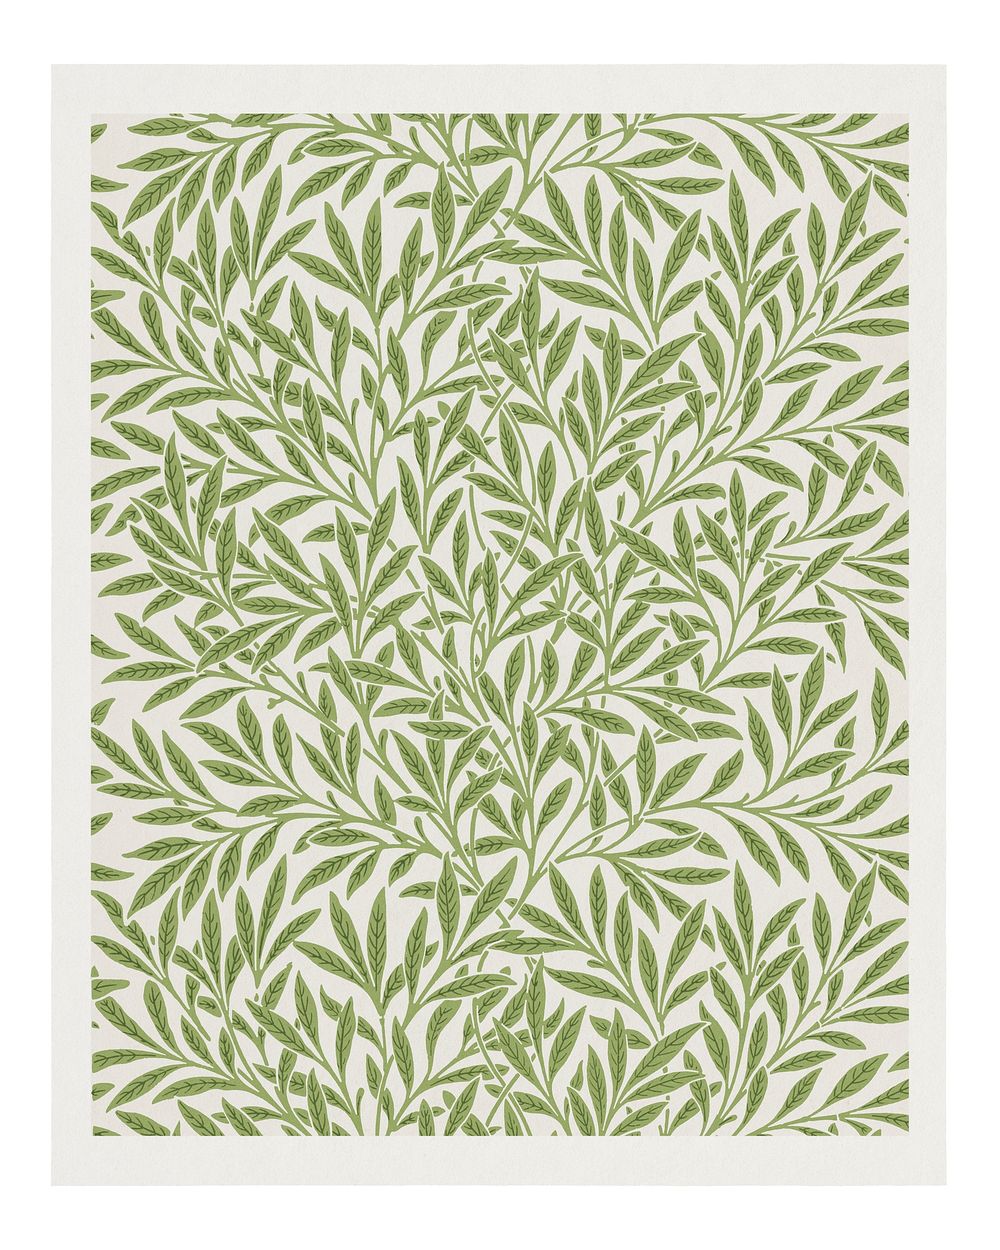 William Morris art print, vintage Willow pattern wall decor (1874). Original from The Smithsonian Institution. Digitally…